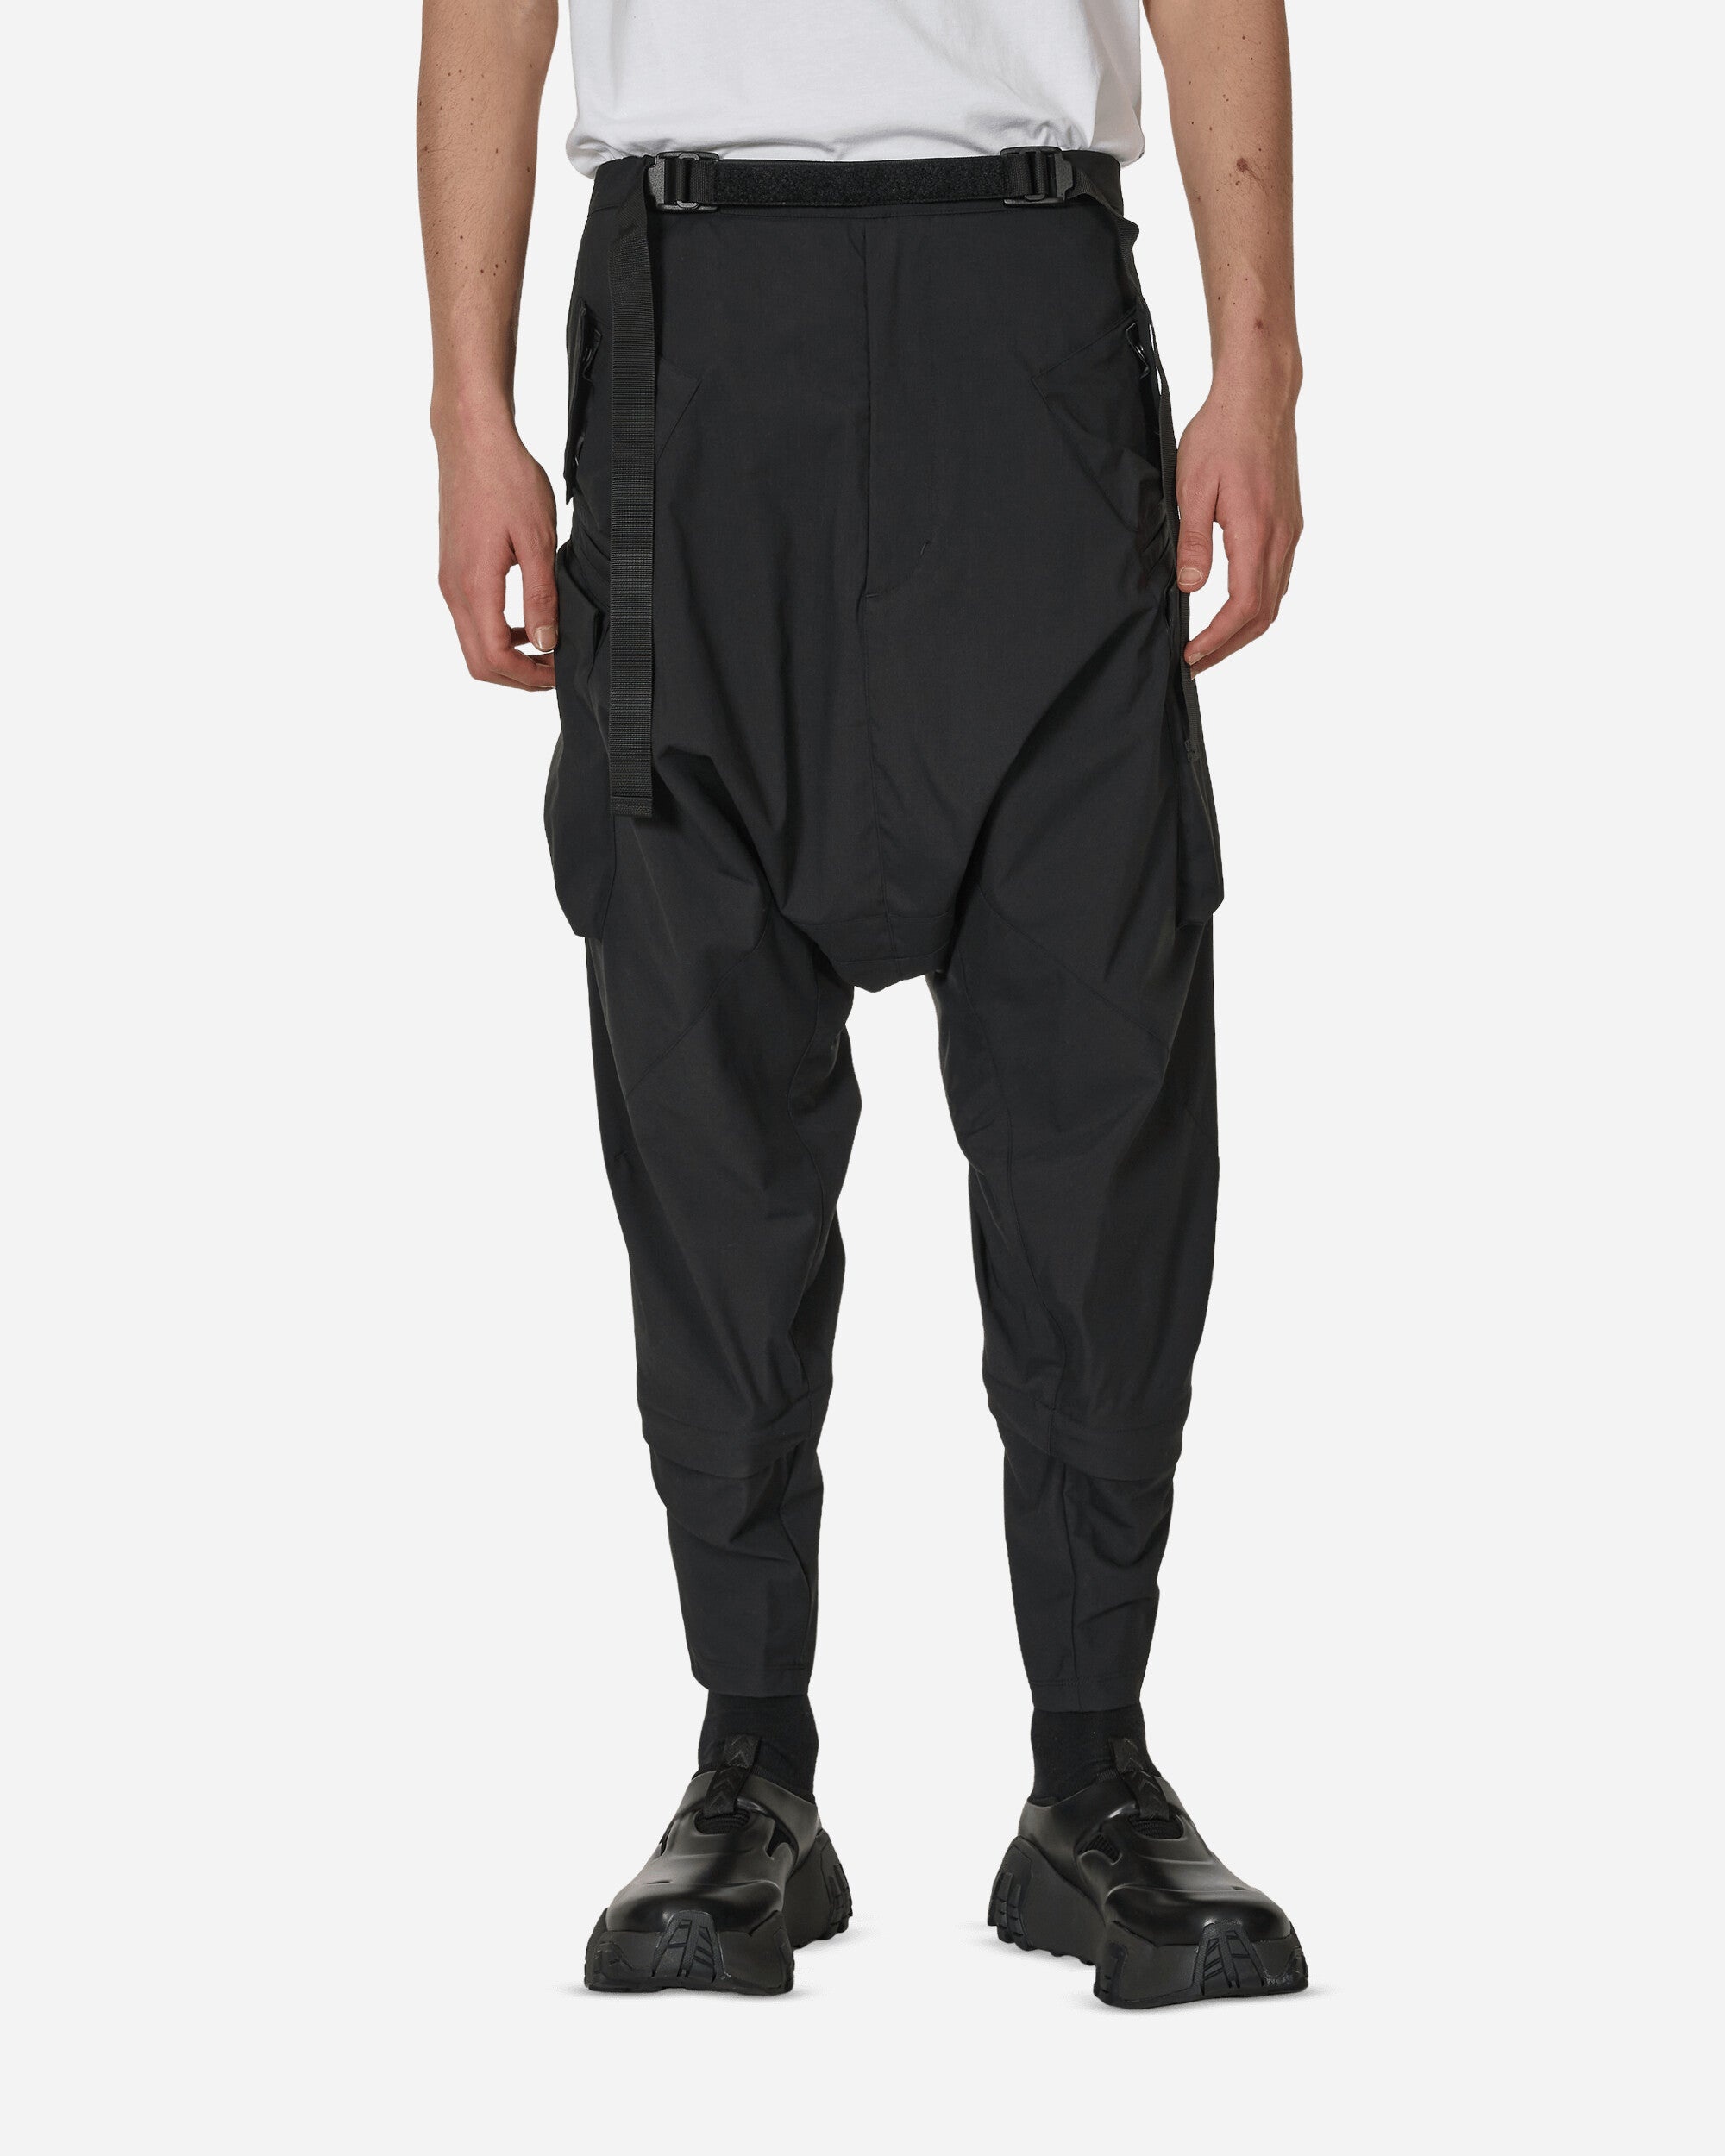 Encapsulated Nylon Articulated Cargo Trousers Black - 1